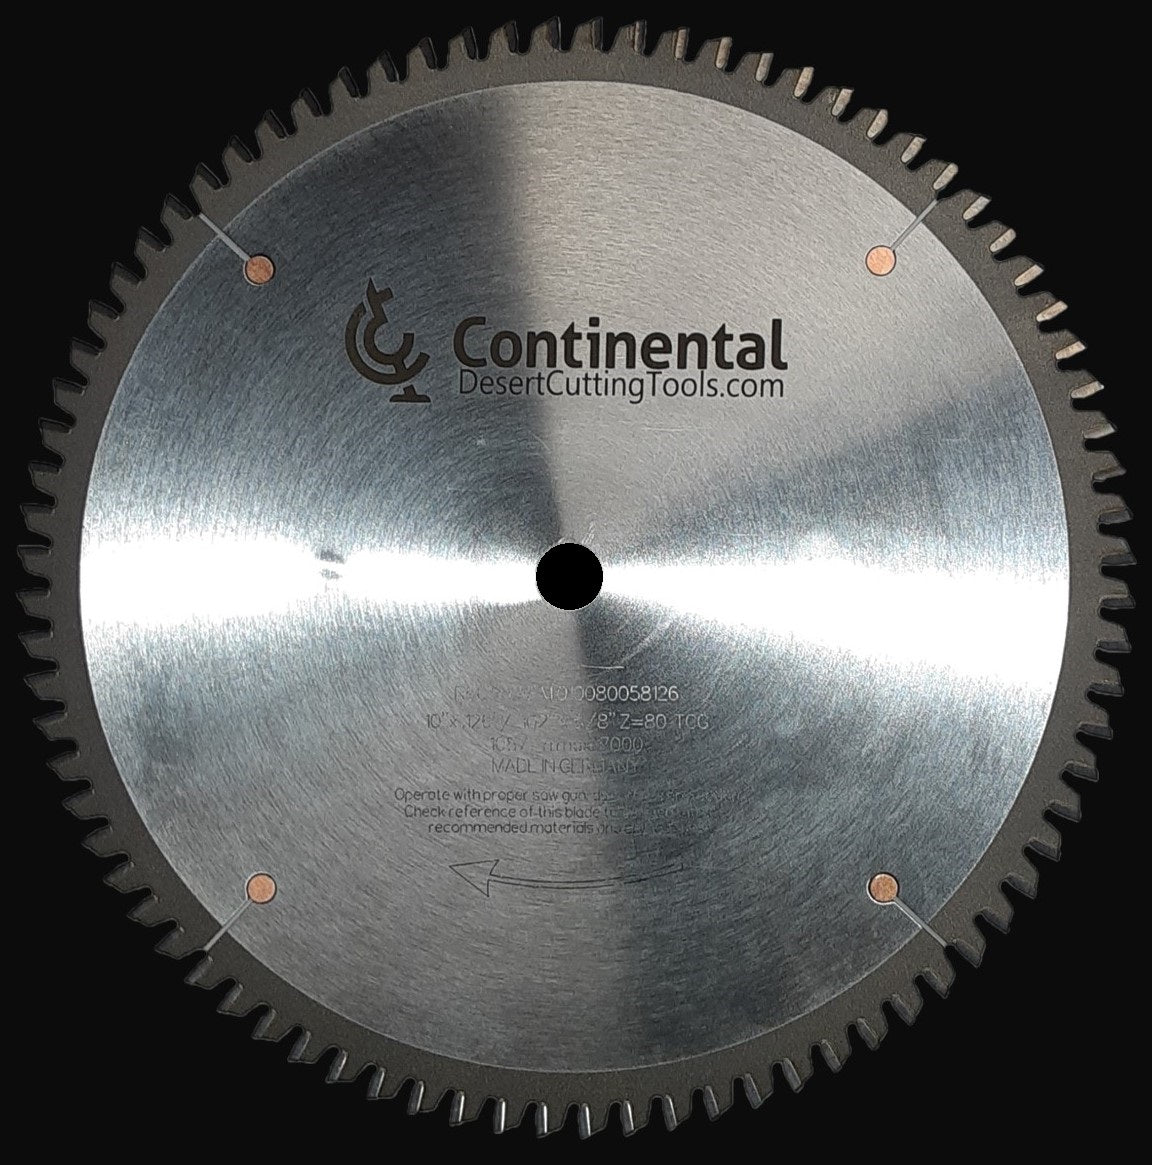 C-1080TA Continental Saw Blade 10"x80 tooth 5/8" bore Thin Alternate Top Bevel